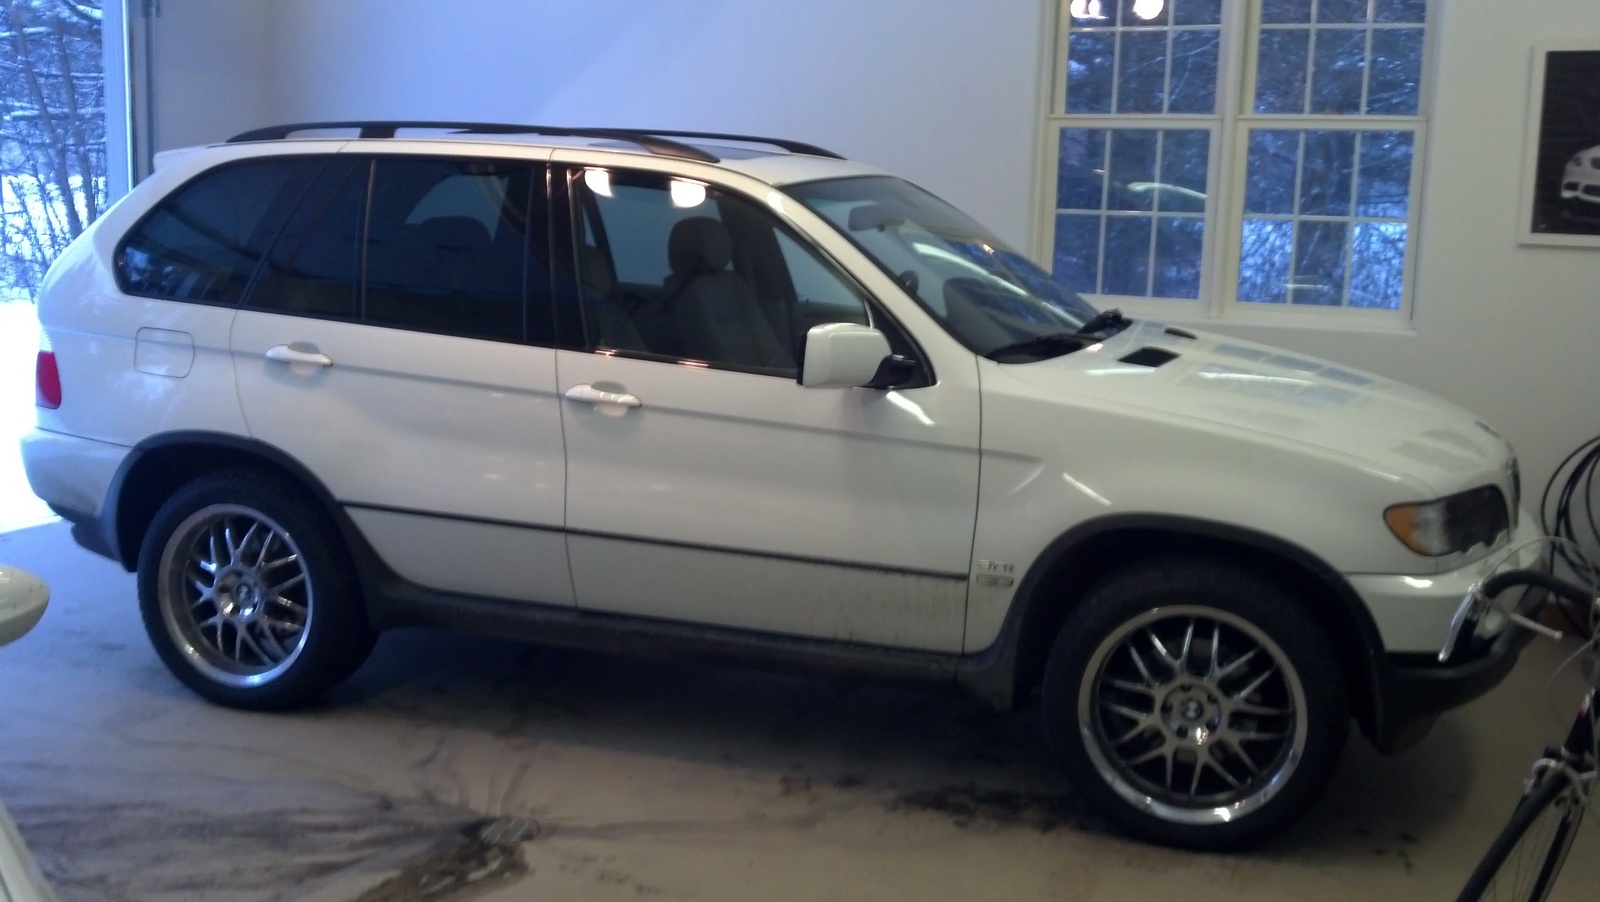 Bmw x5 for sale in wisconsin